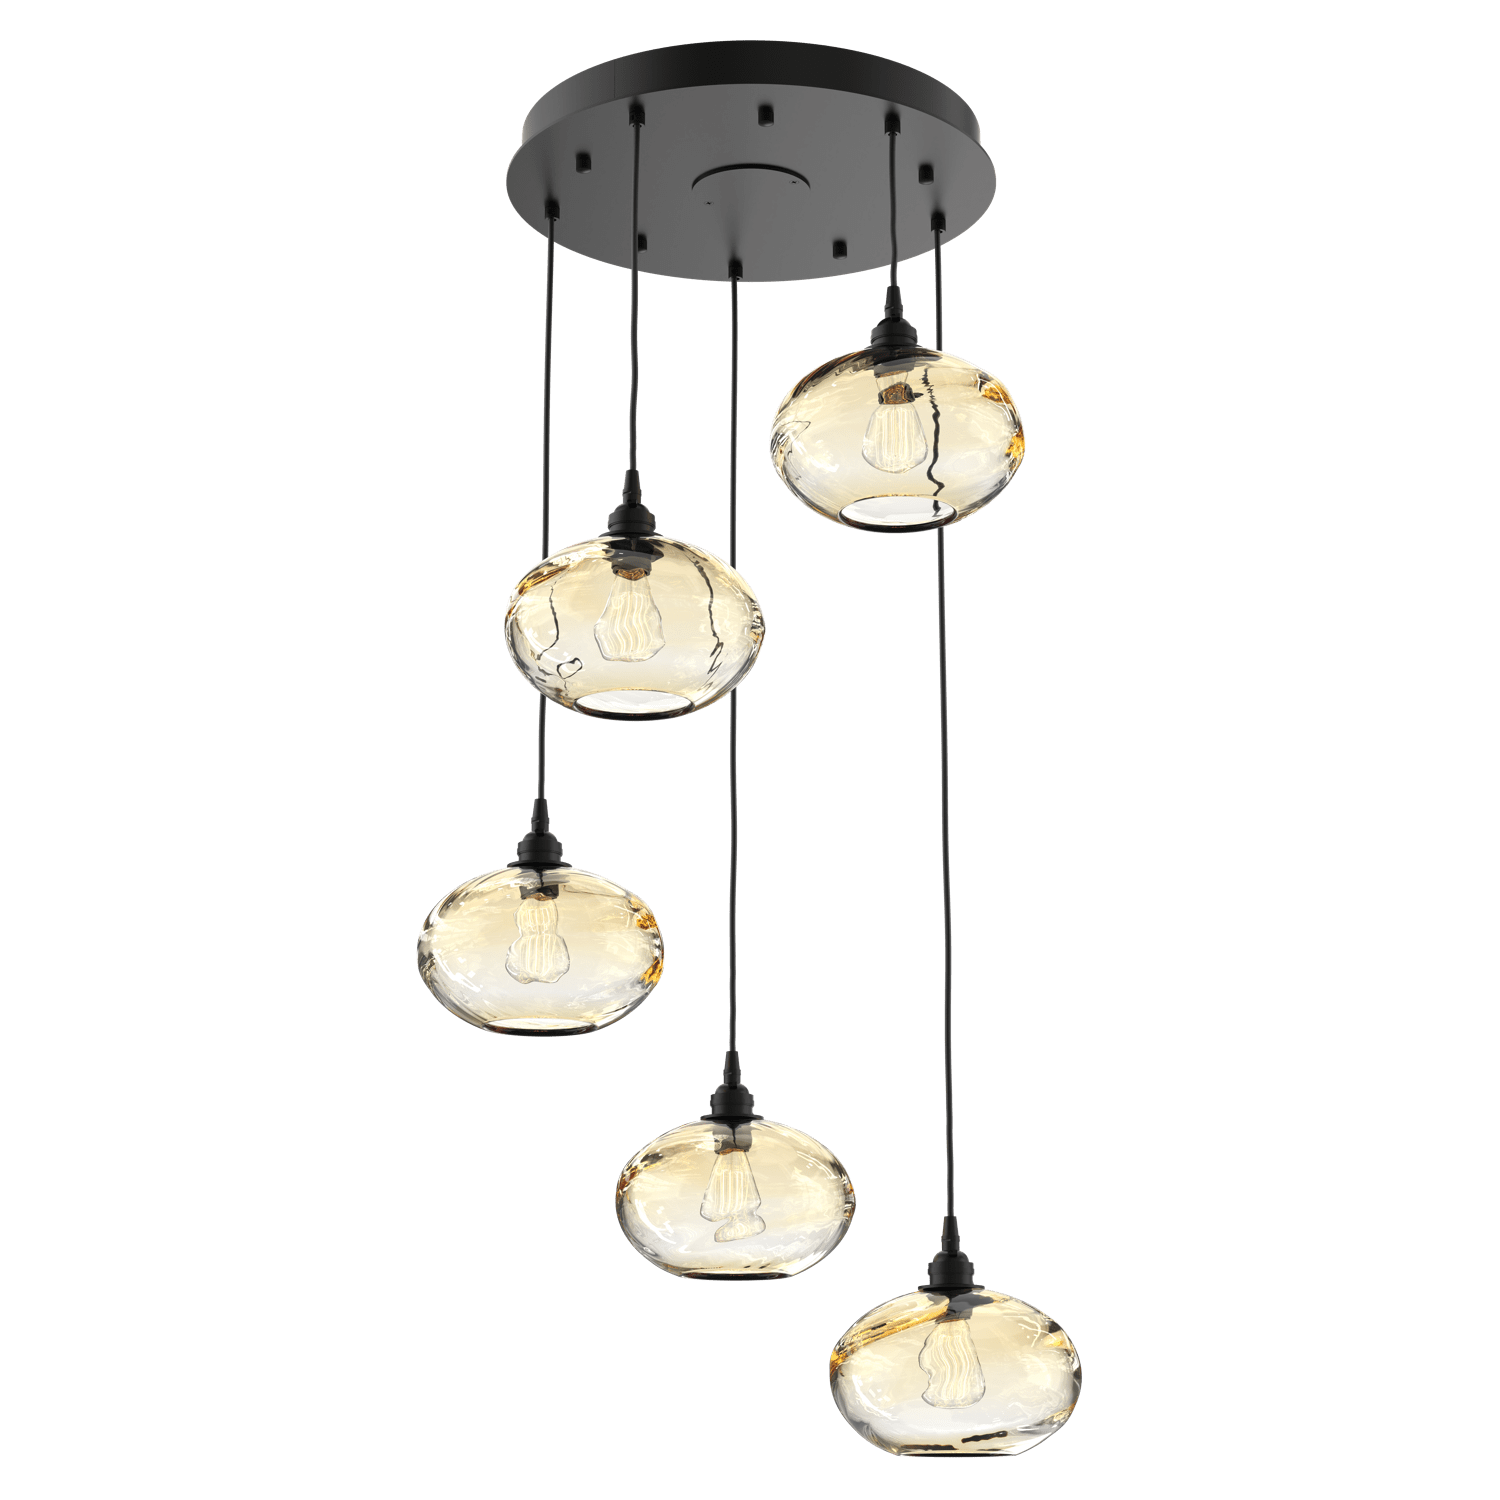 CHB0036-05-MB-OA-Hammerton-Studio-Optic-Blown-Glass-Coppa-5-light-round-pendant-chandelier-with-matte-black-finish-and-optic-amber-blown-glass-shades-and-incandescent-lamping